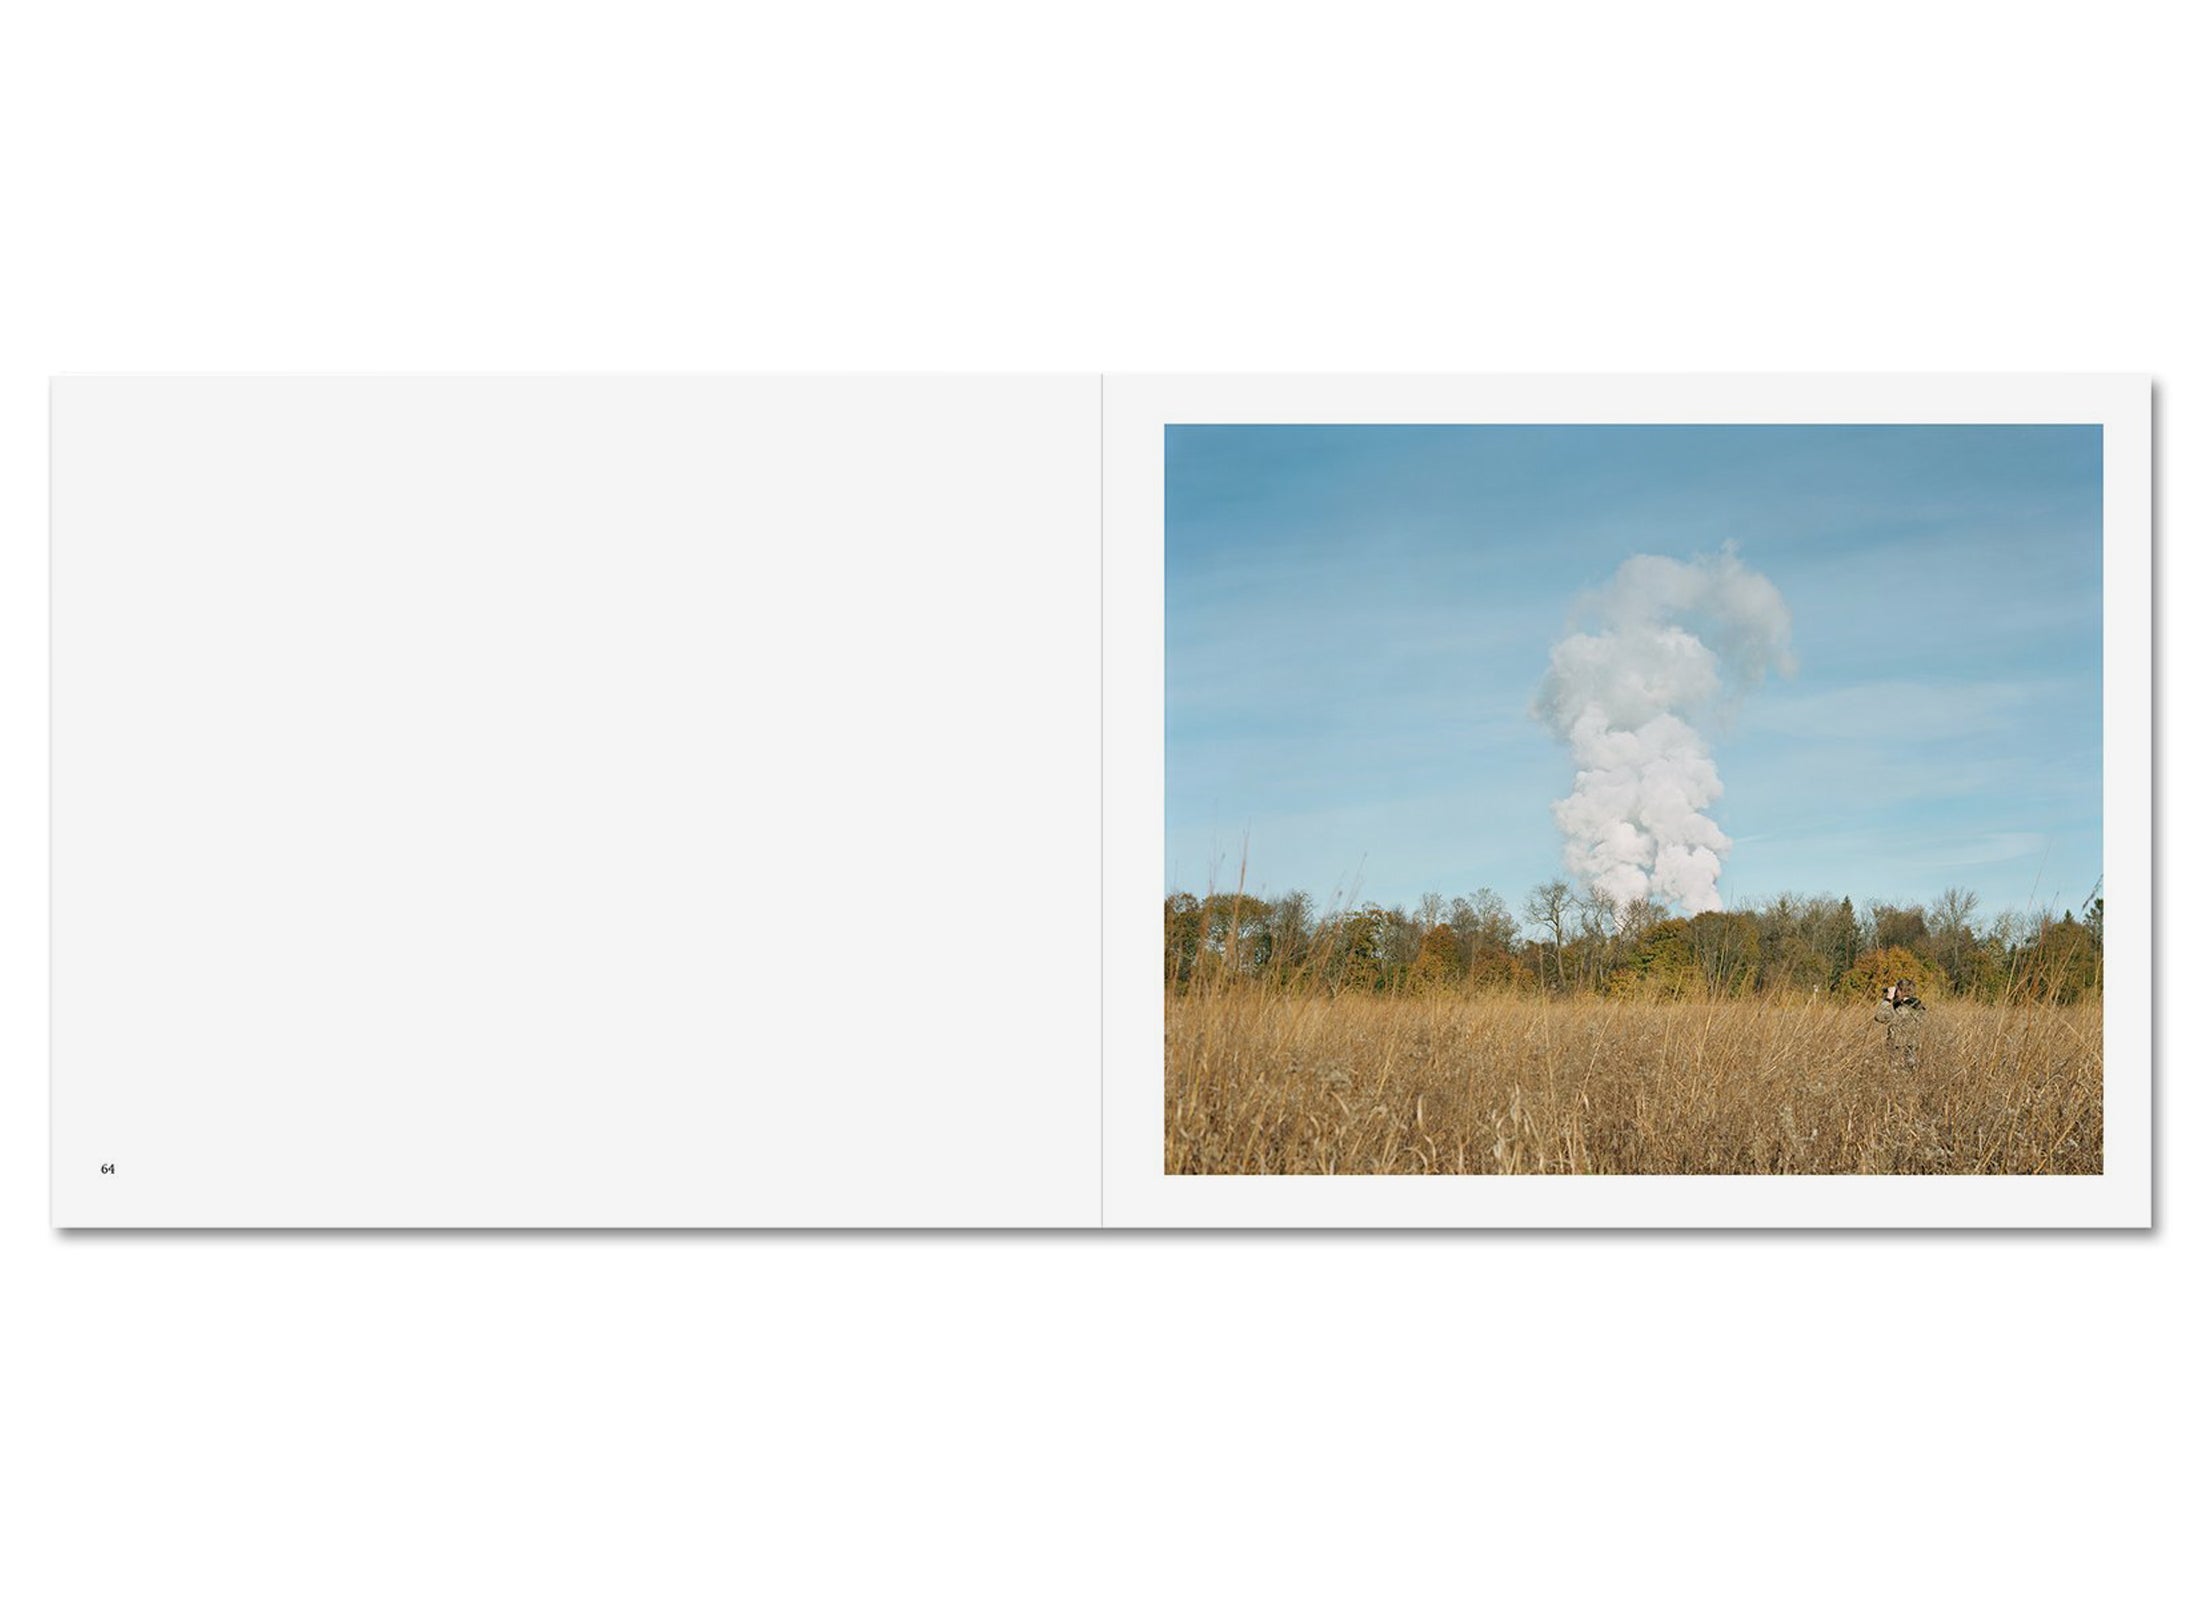 A POUND OF PICTURES by Alec Soth